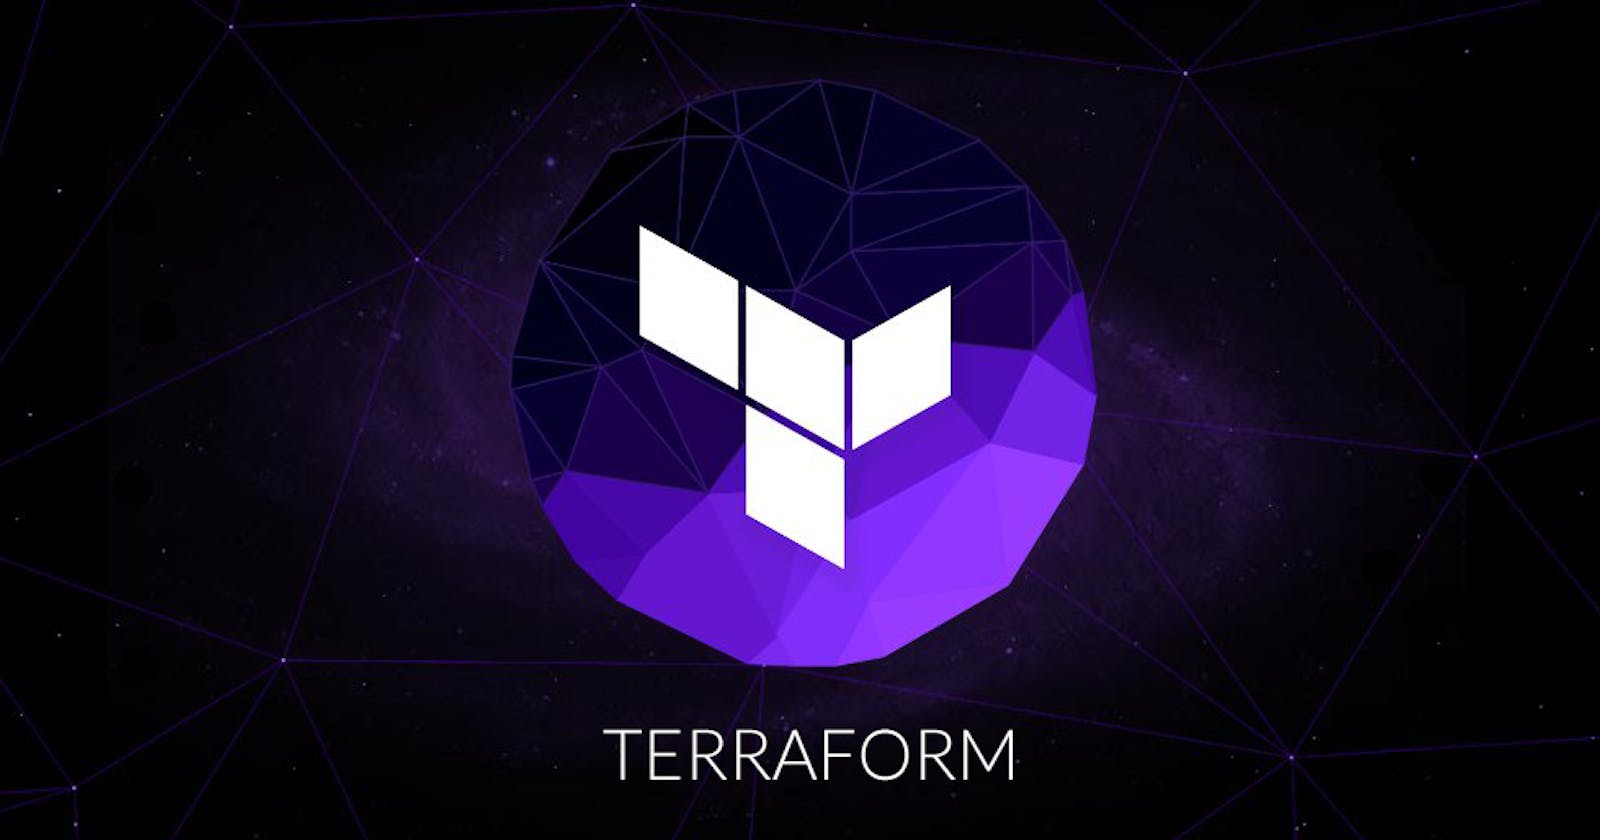 Deep Dive into Terraform - P9 (Deployment of AWS EKS Cluster, Cluster's Node Group, IAM Roles and Remote Backend to store State file using Terraform)